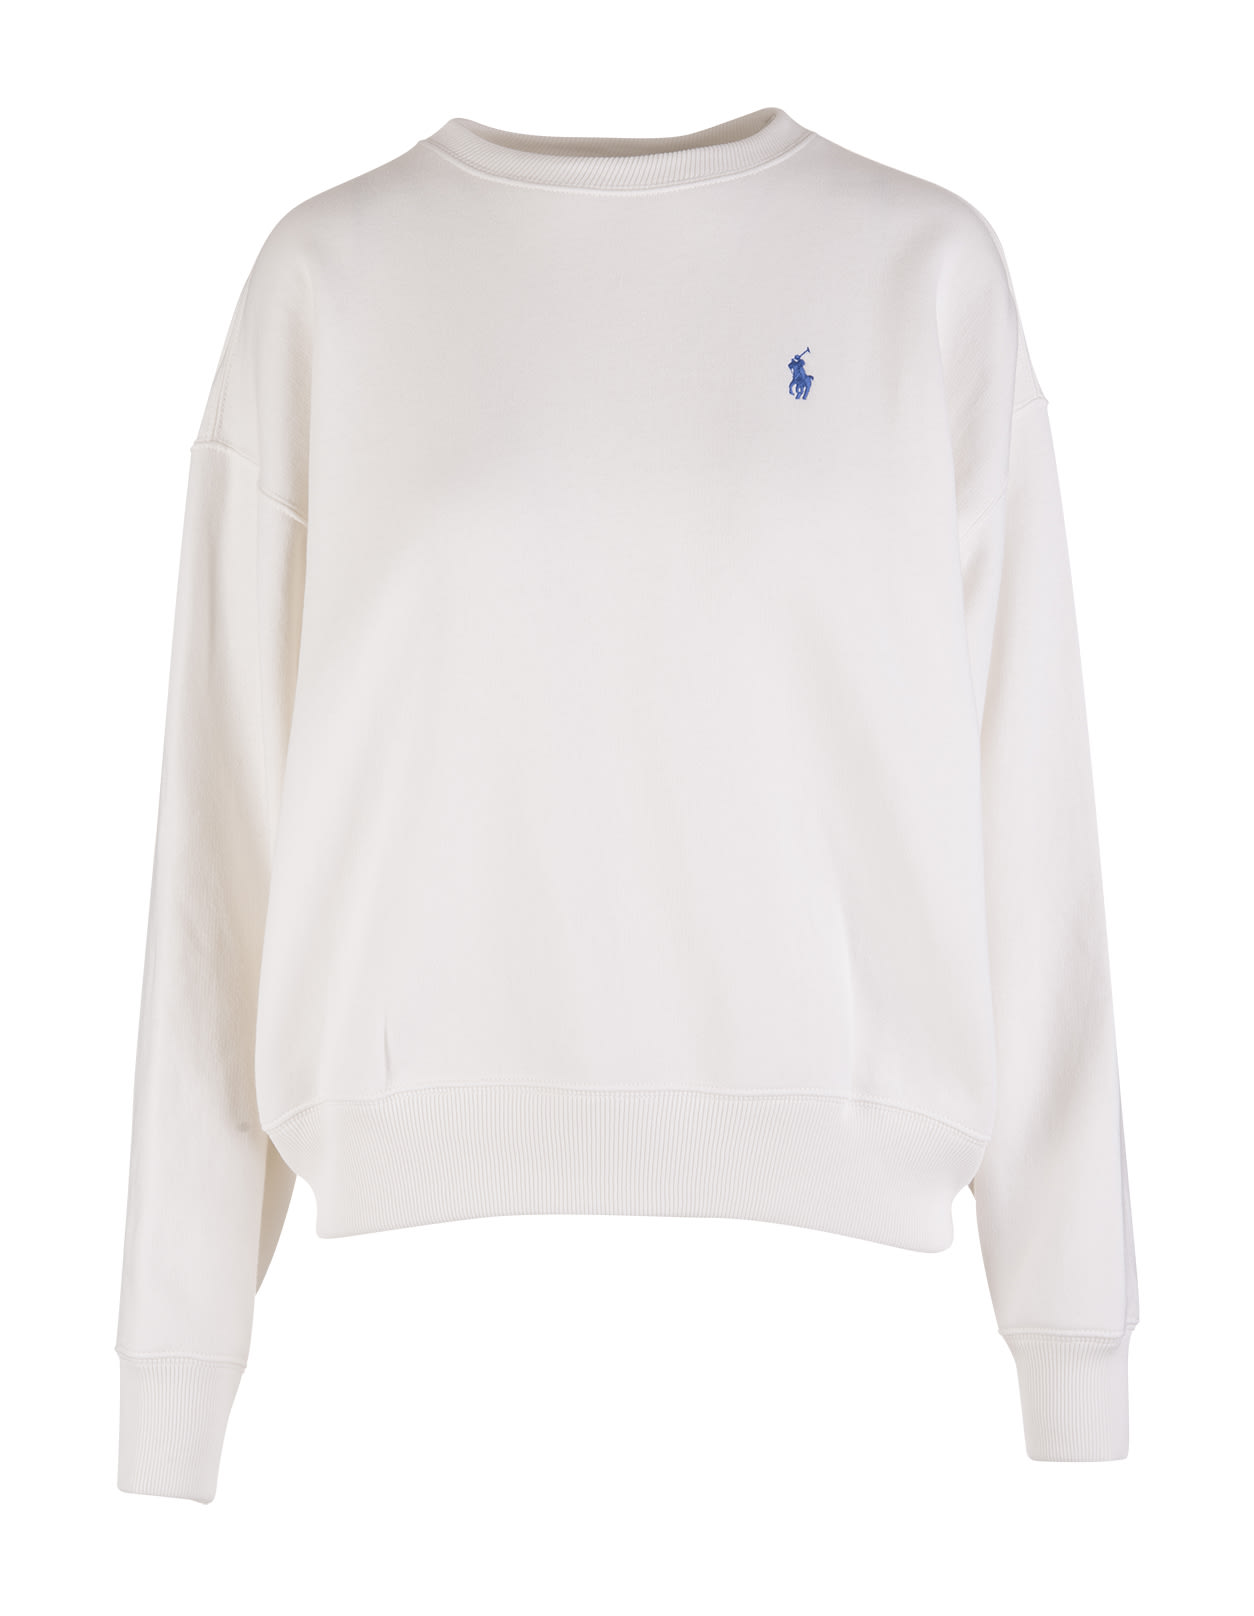 Ralph Lauren Woman White Sweatshirt With Good Vibes Embroidery